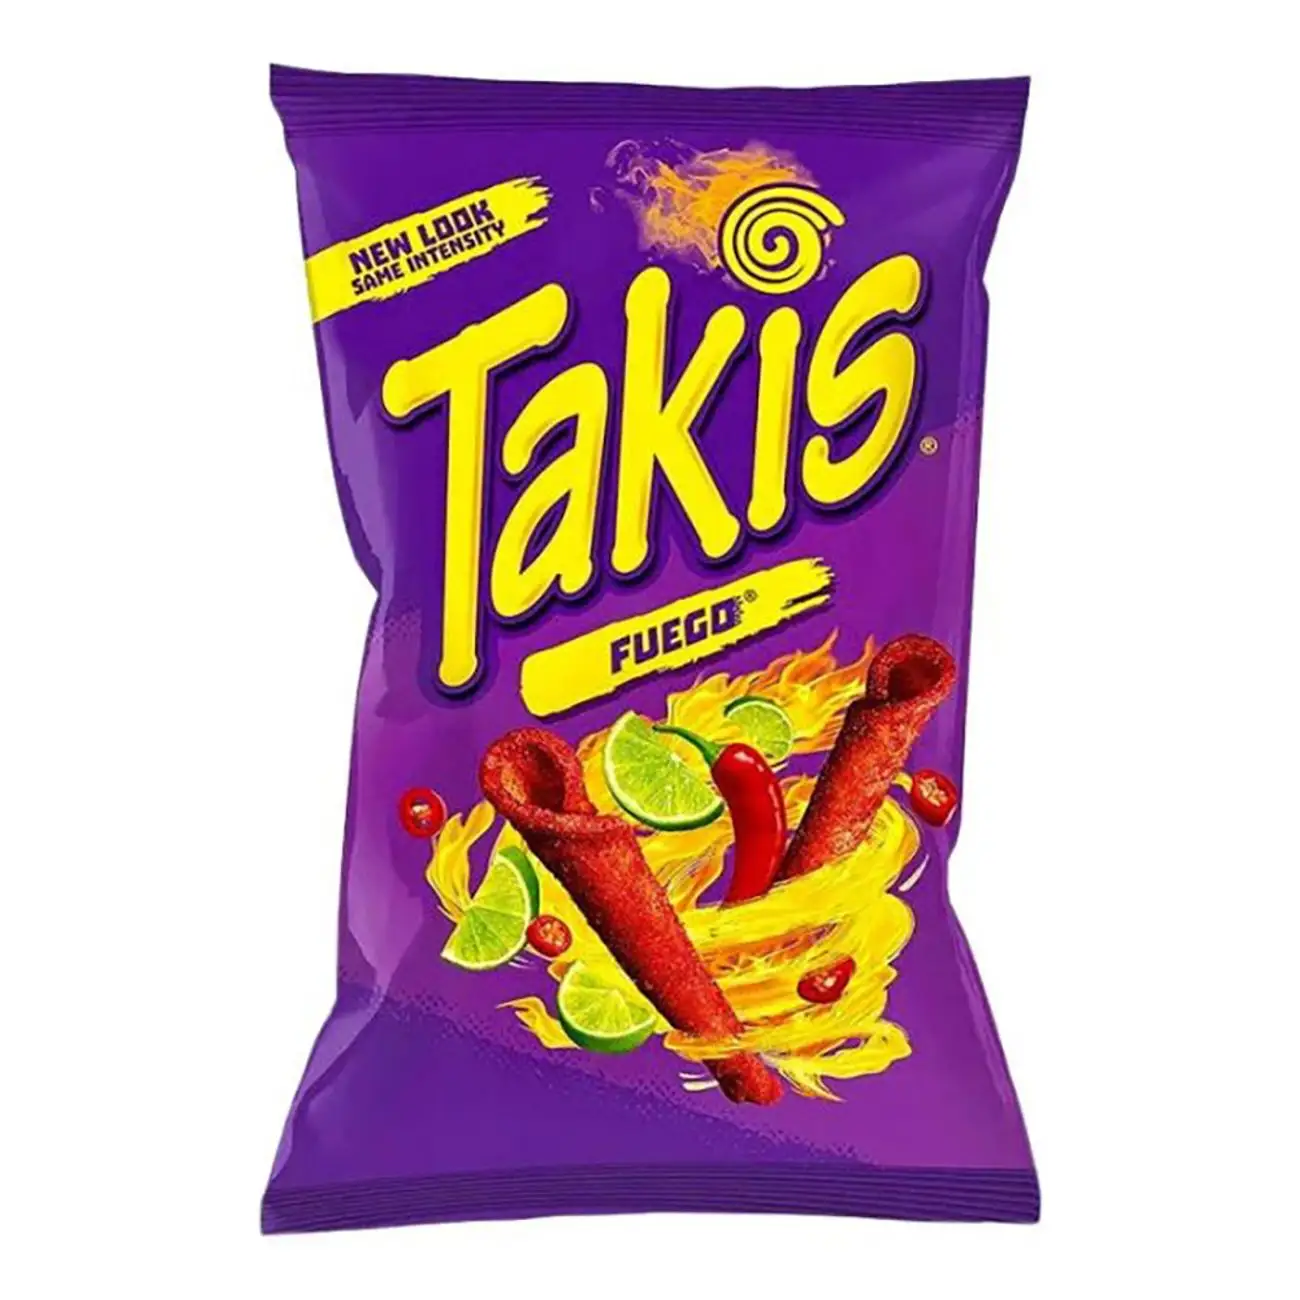 Takis Fuego 92g, 280g best rolled tortilla chips/Blue Heat PepperTakis